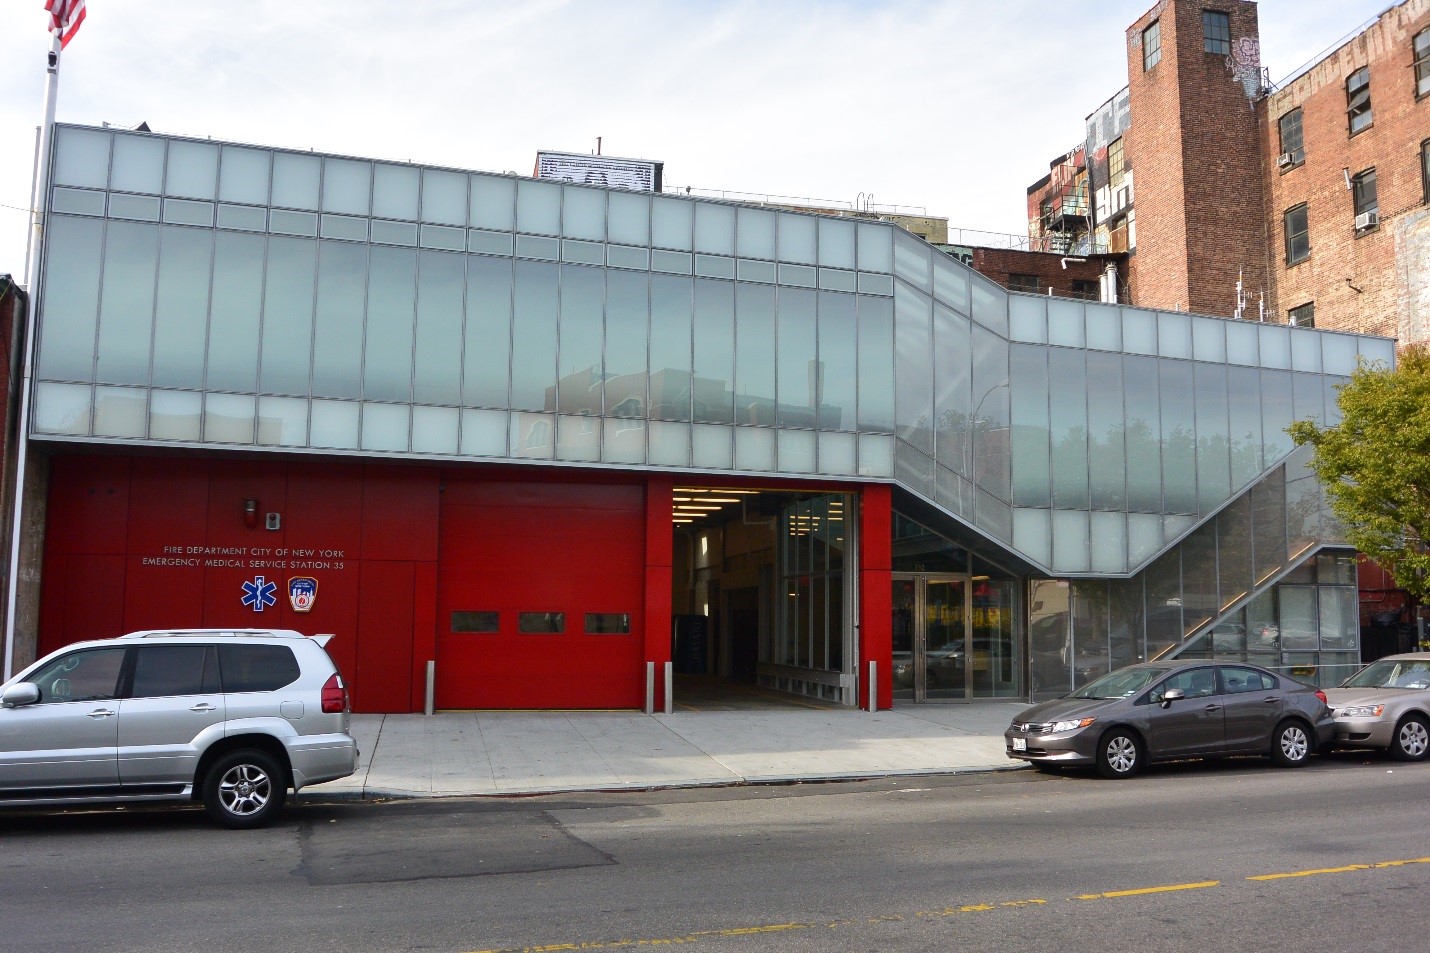 The Greenpoint EMS Station in Brooklyn